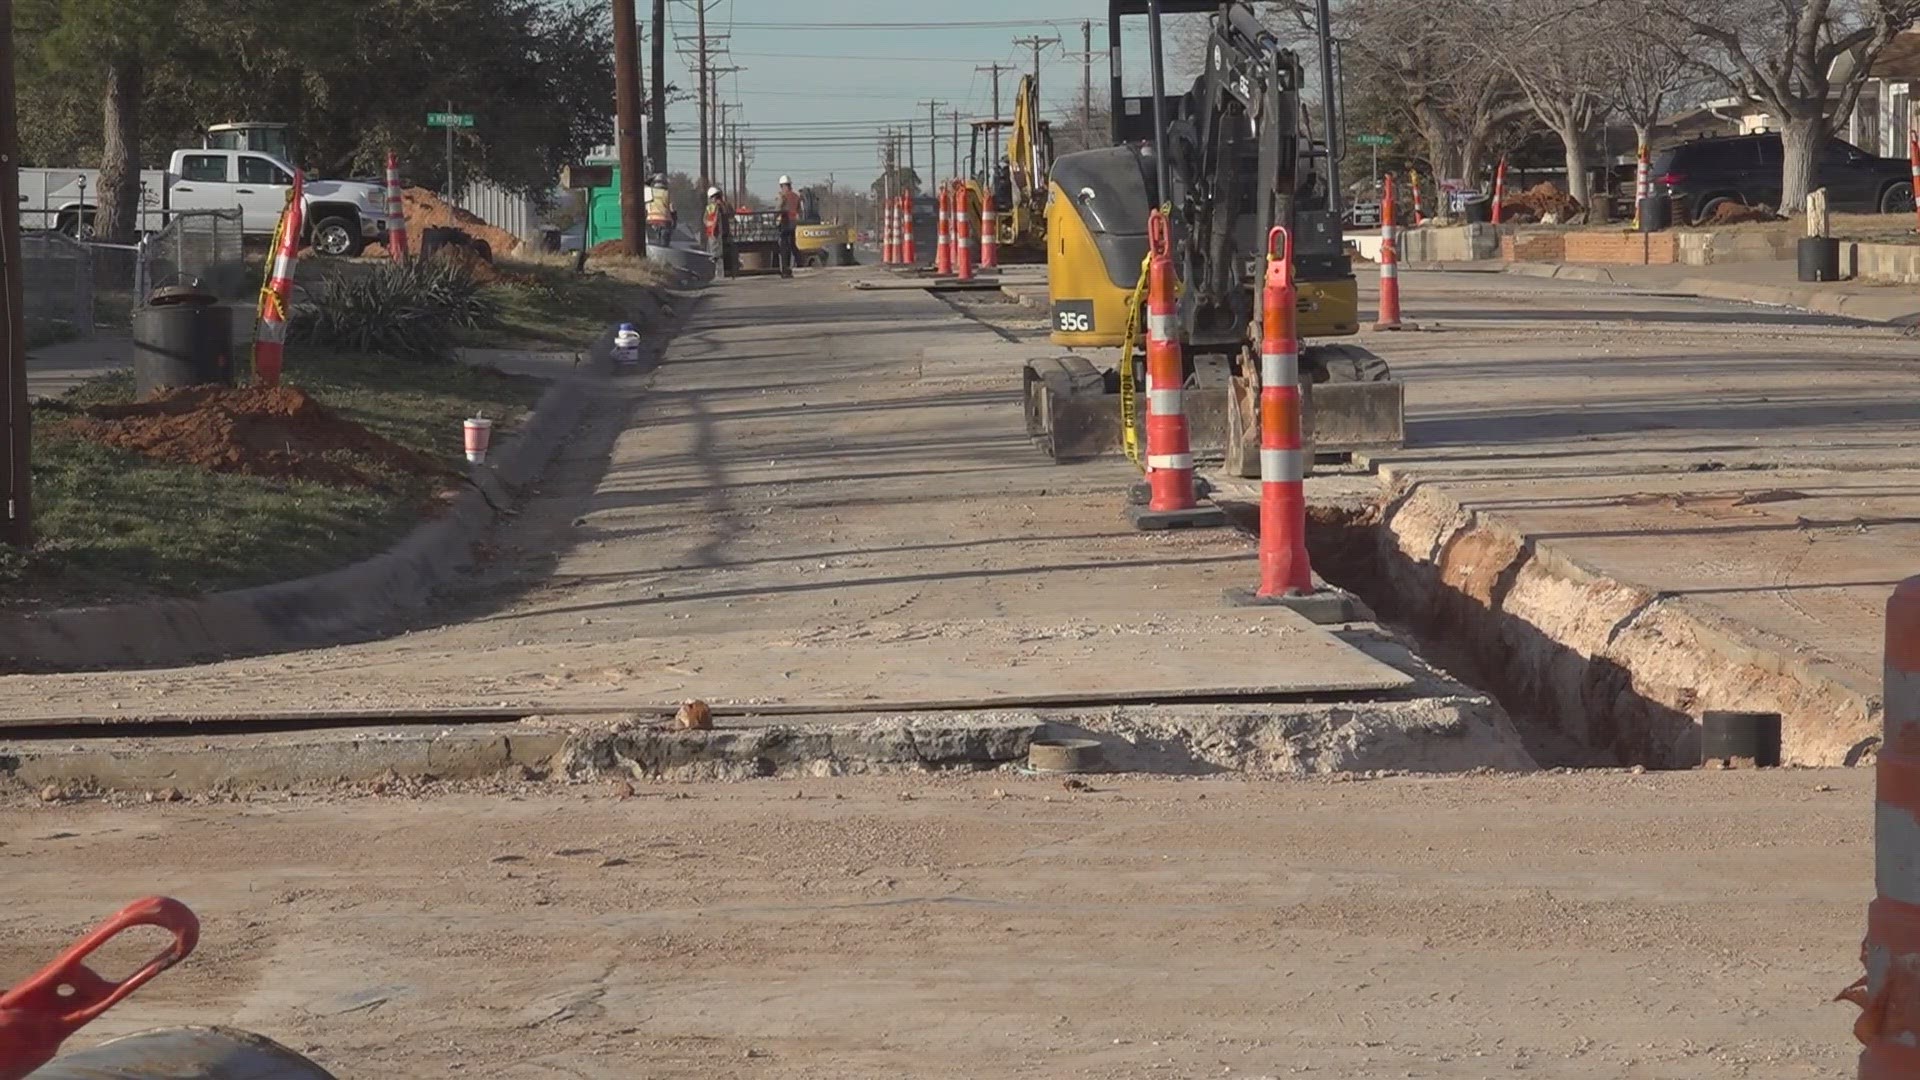 24 of 26 road and utility project are finished. The voter-approved $100 million in bond funding from 2017 has provided stability and upside for Midland's future.